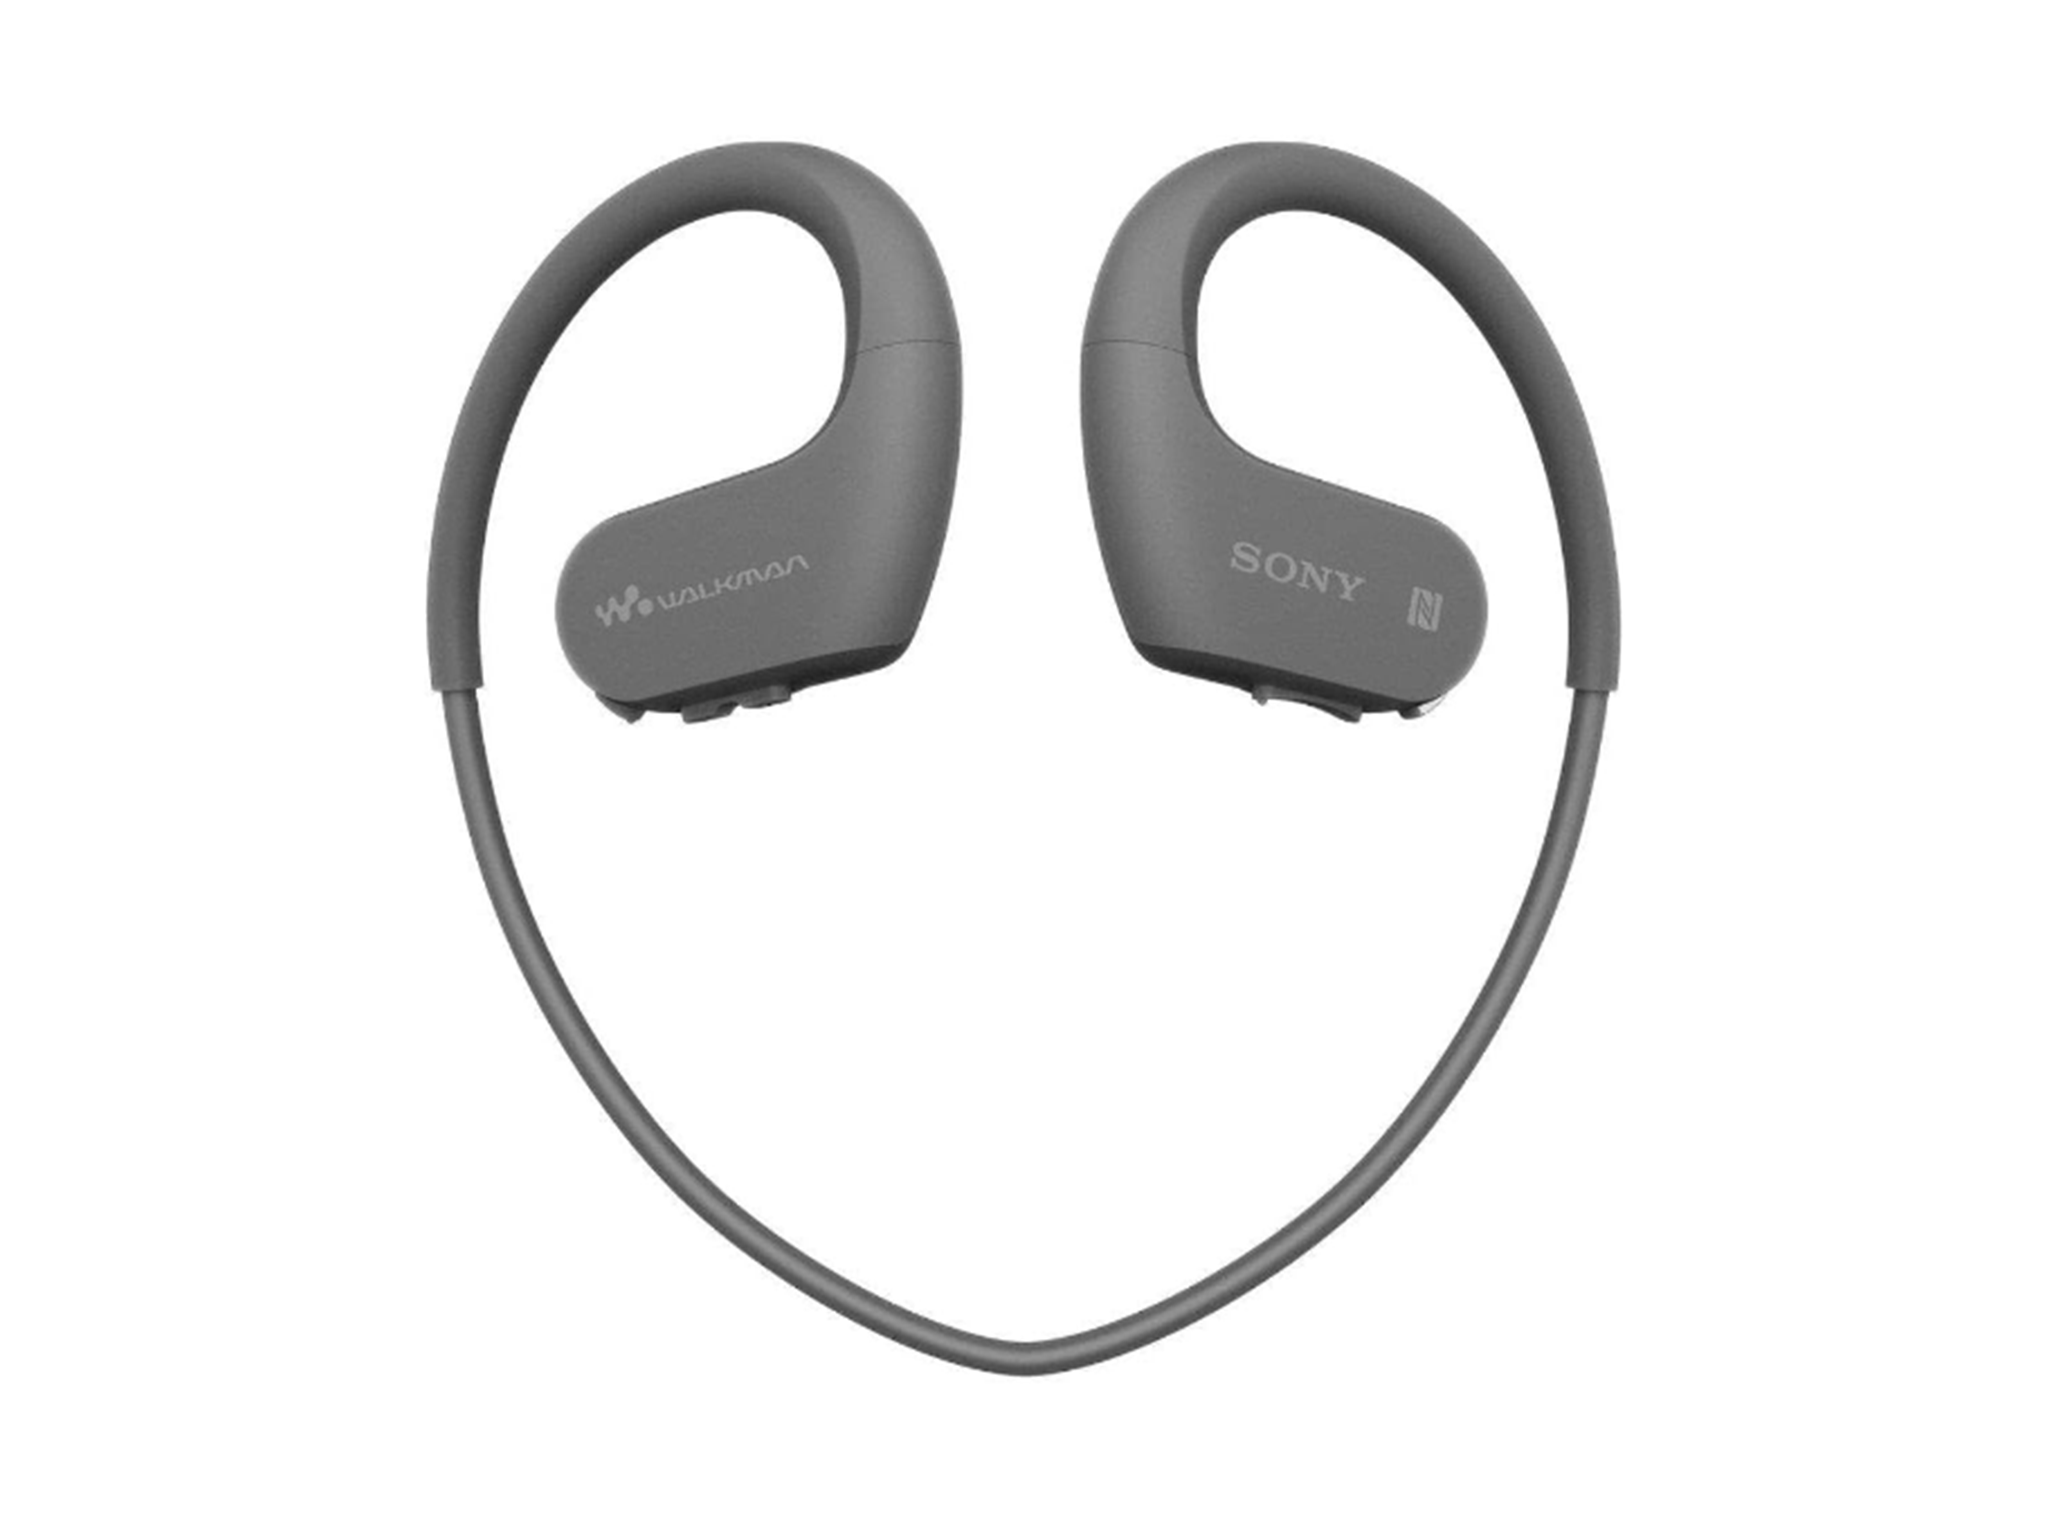 Sony NW-WS623 waterproof MP3 player headphones with Bluetooth